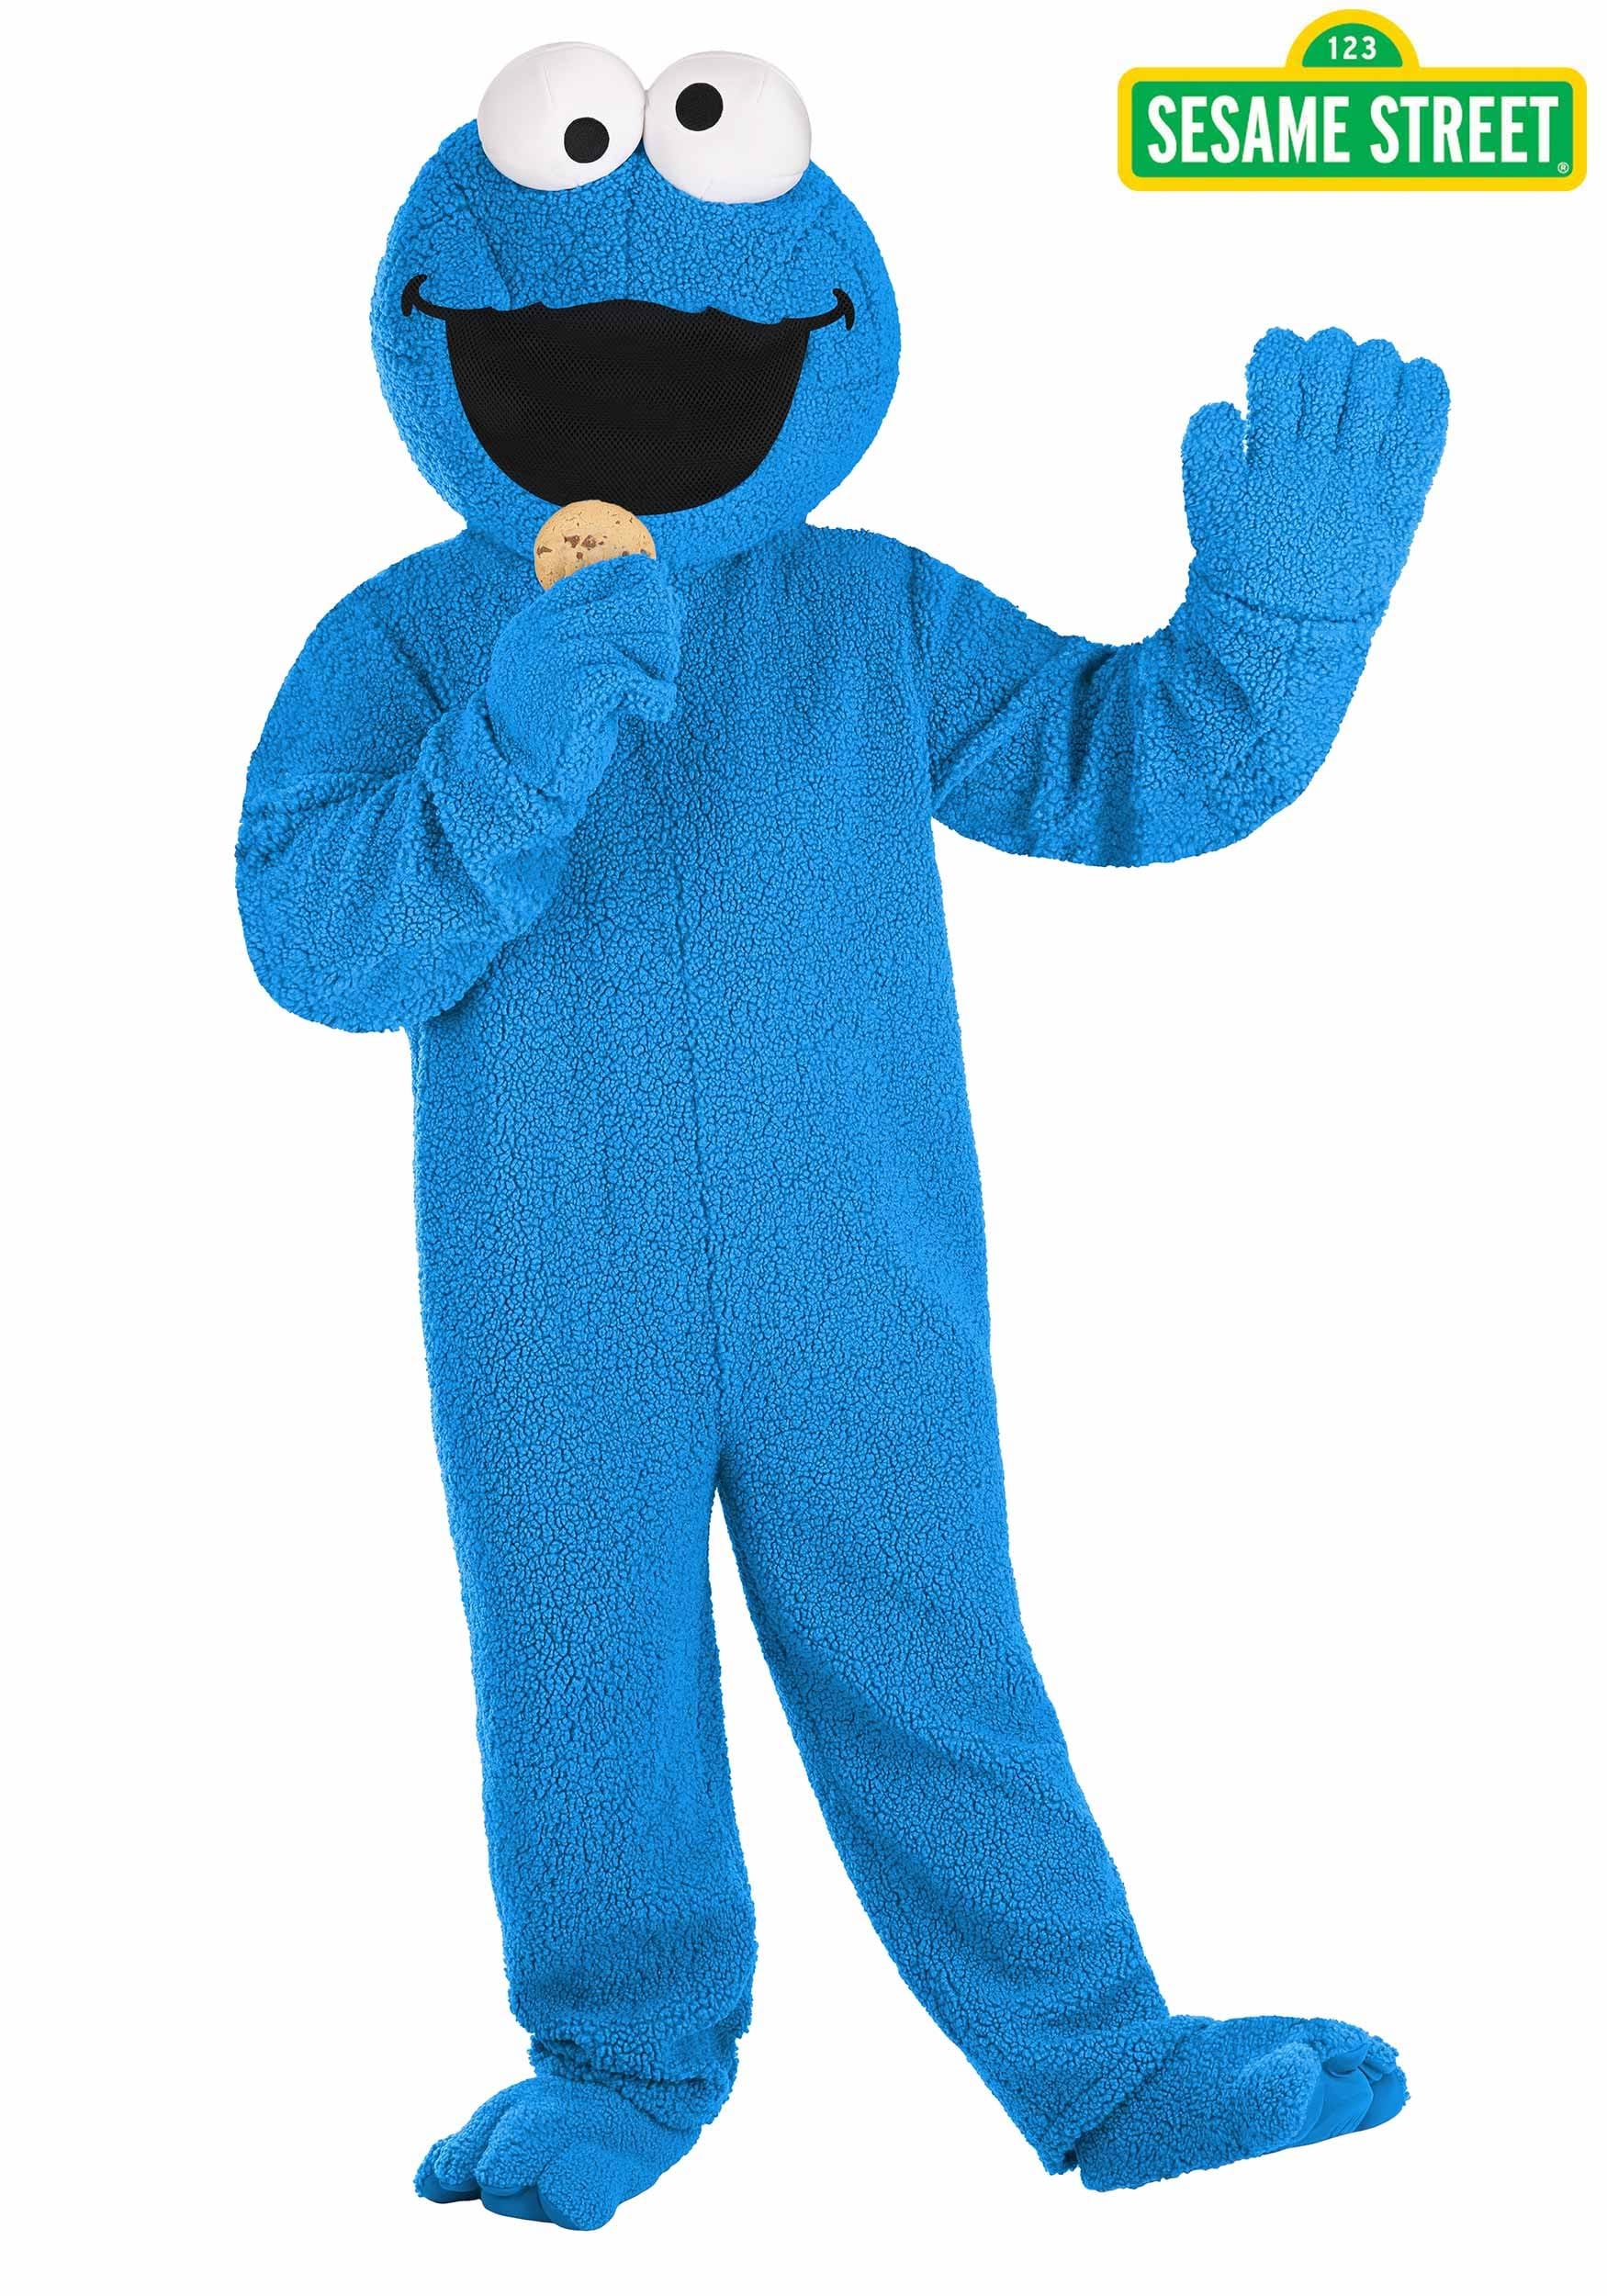 Plus Size Cookie Monster Mascot Costume